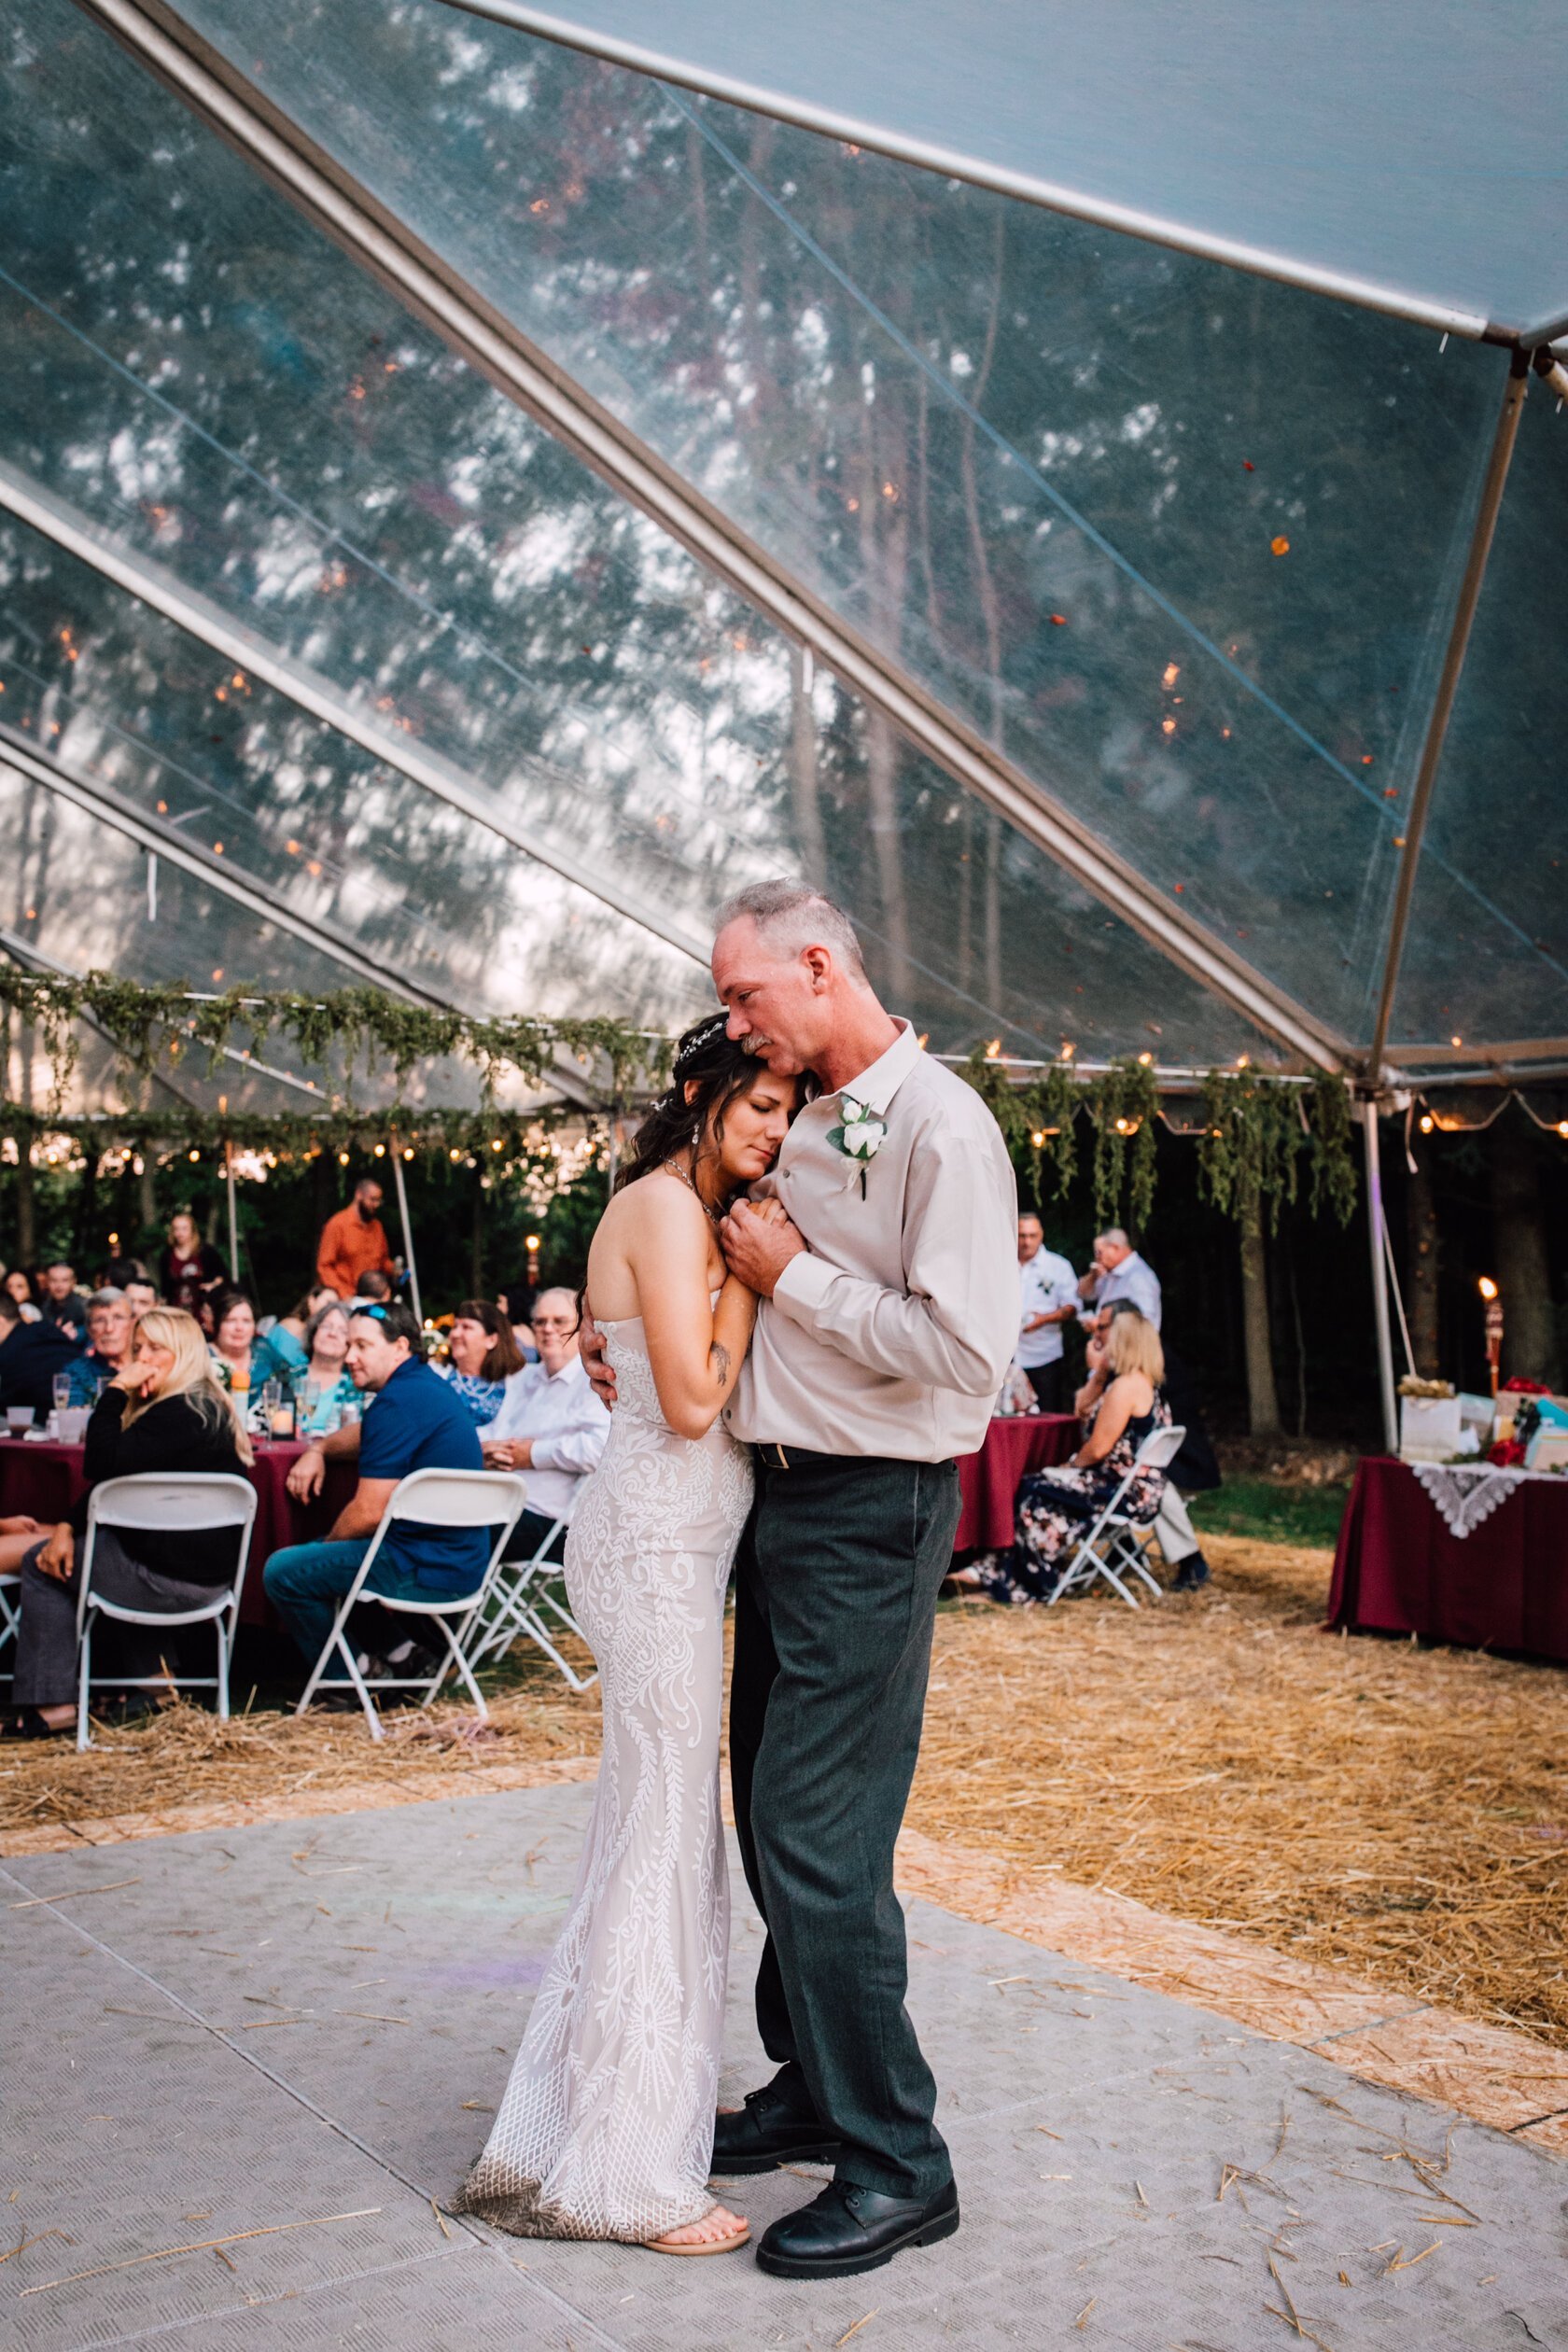  The bride dances with her father at her rustic wedding 